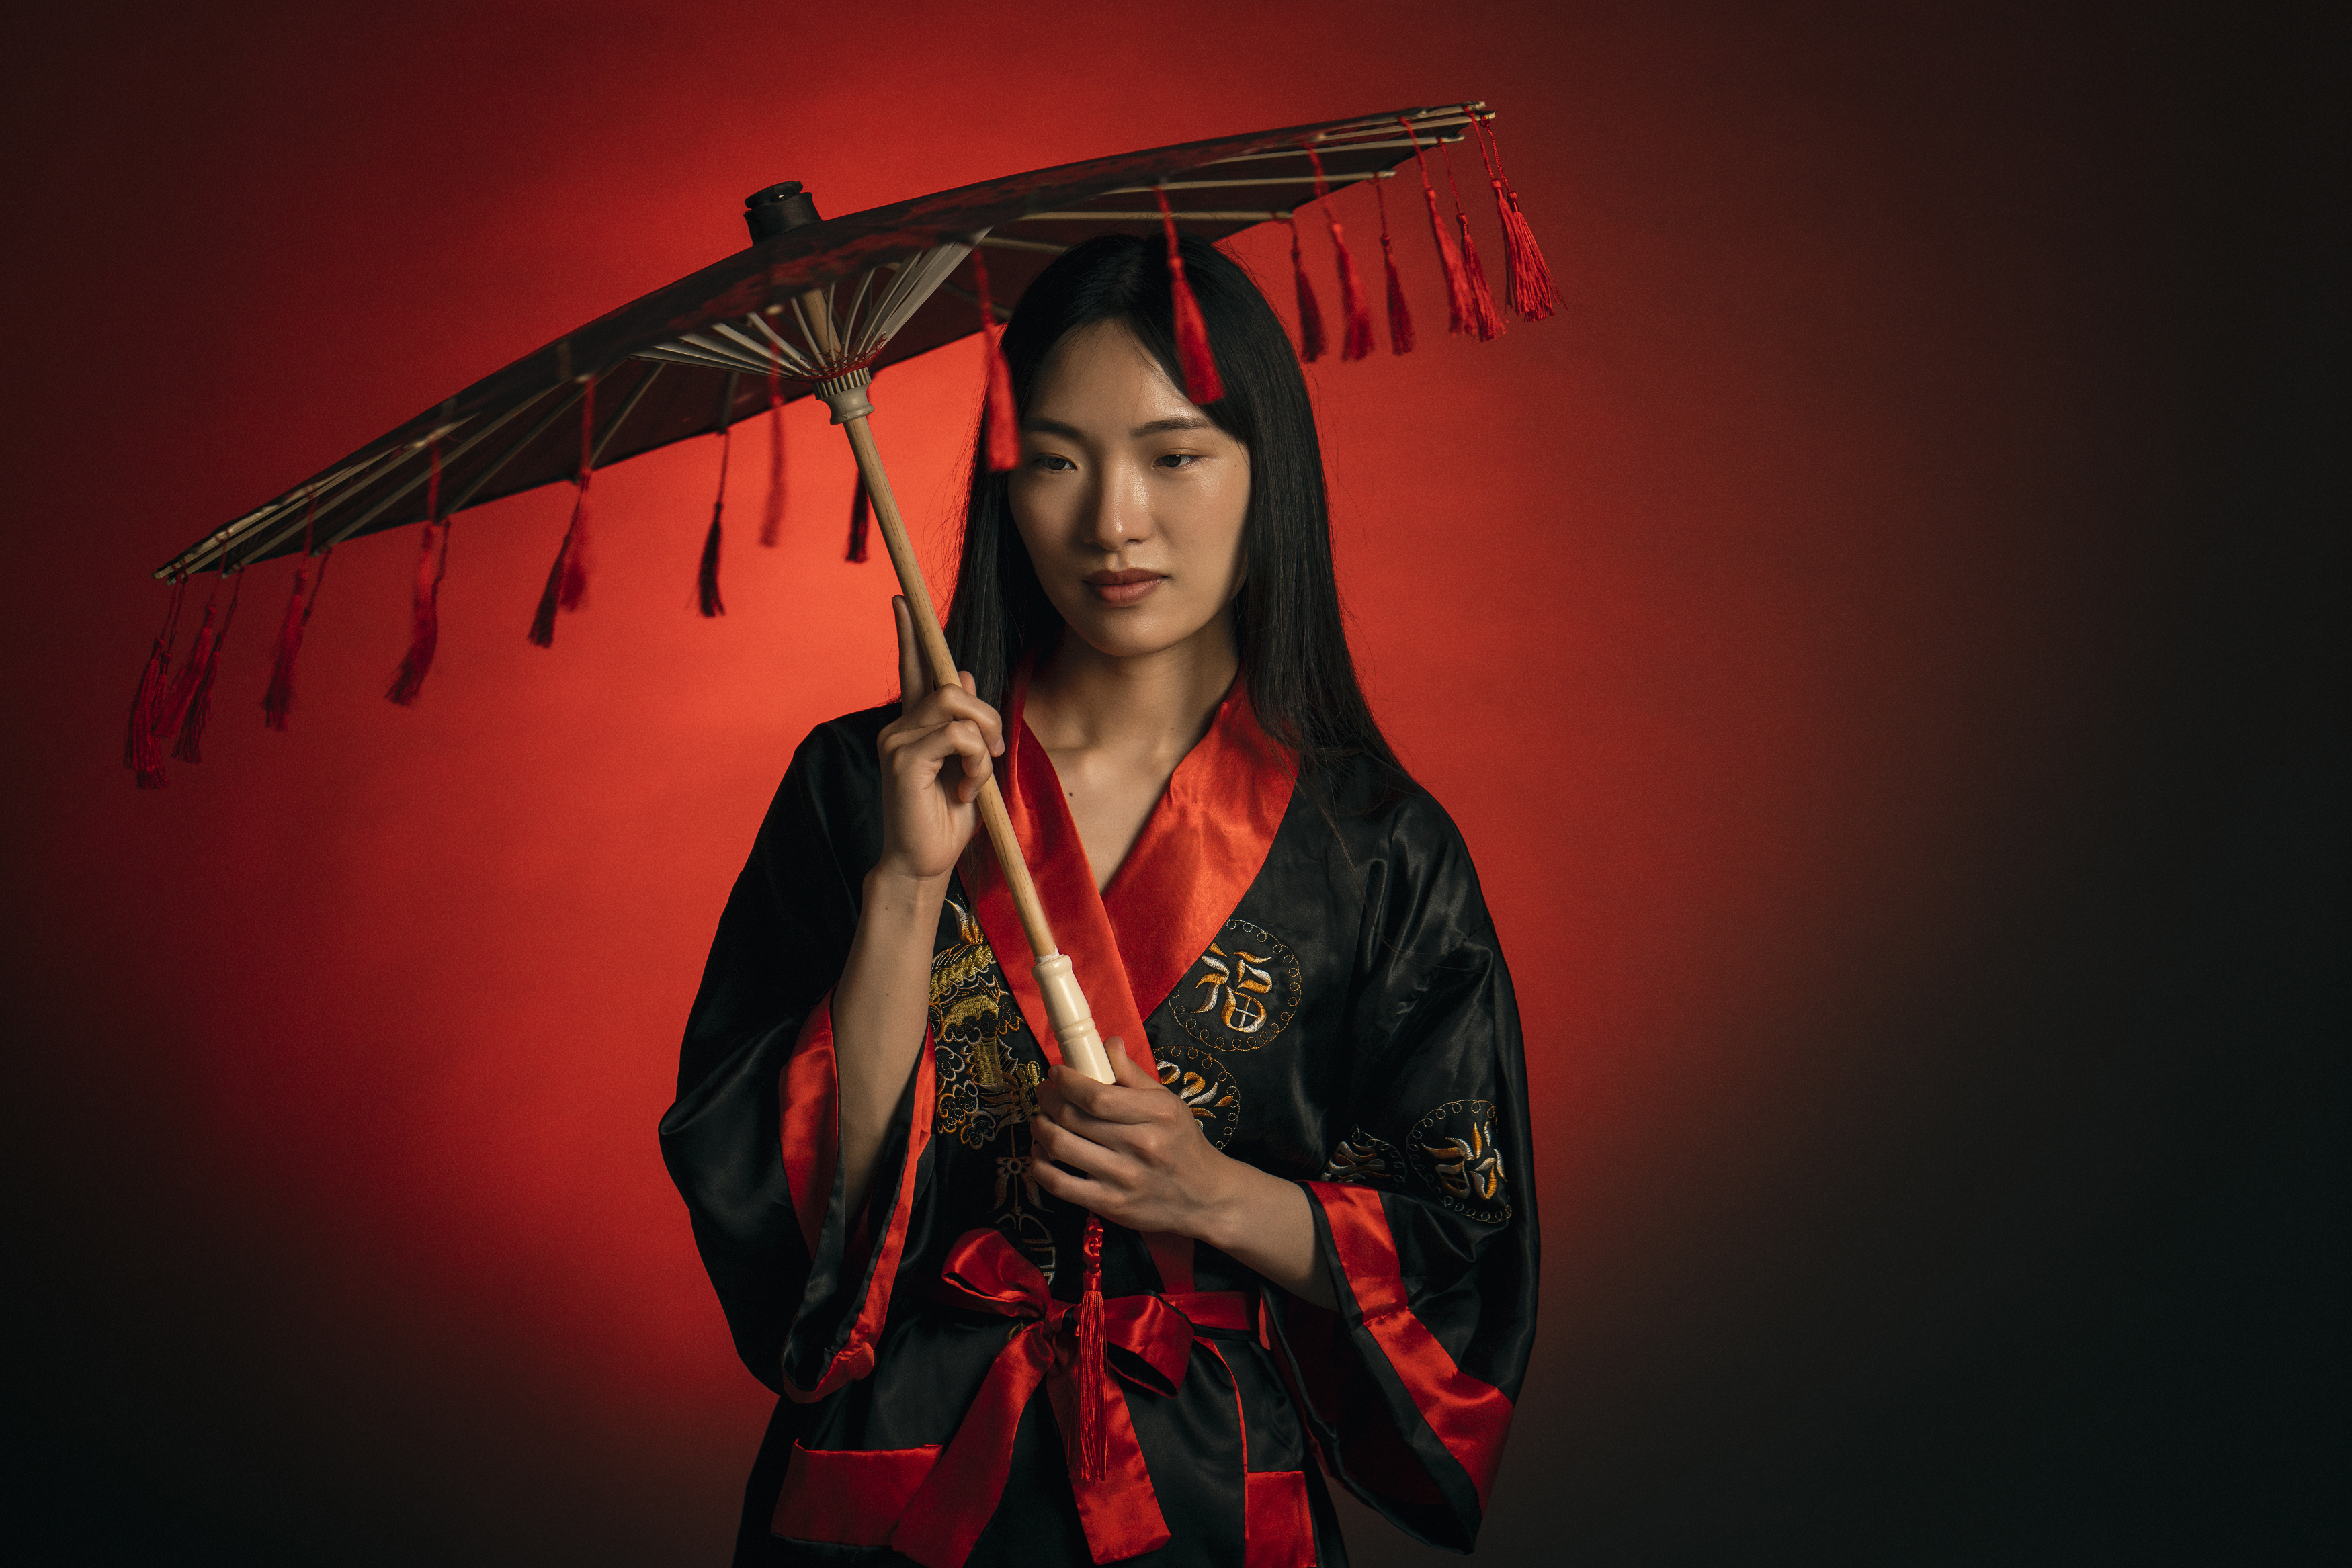 beauty, chinese girl, dreaminess, elegance, fashion, female, femininity, front view, headshot, human face, individuality, indoors, lifestyles, light, looking, one person, portrait, shadow, standing, studio shot, traditional clothing, umbrella, young woman, Alex Tsarfin